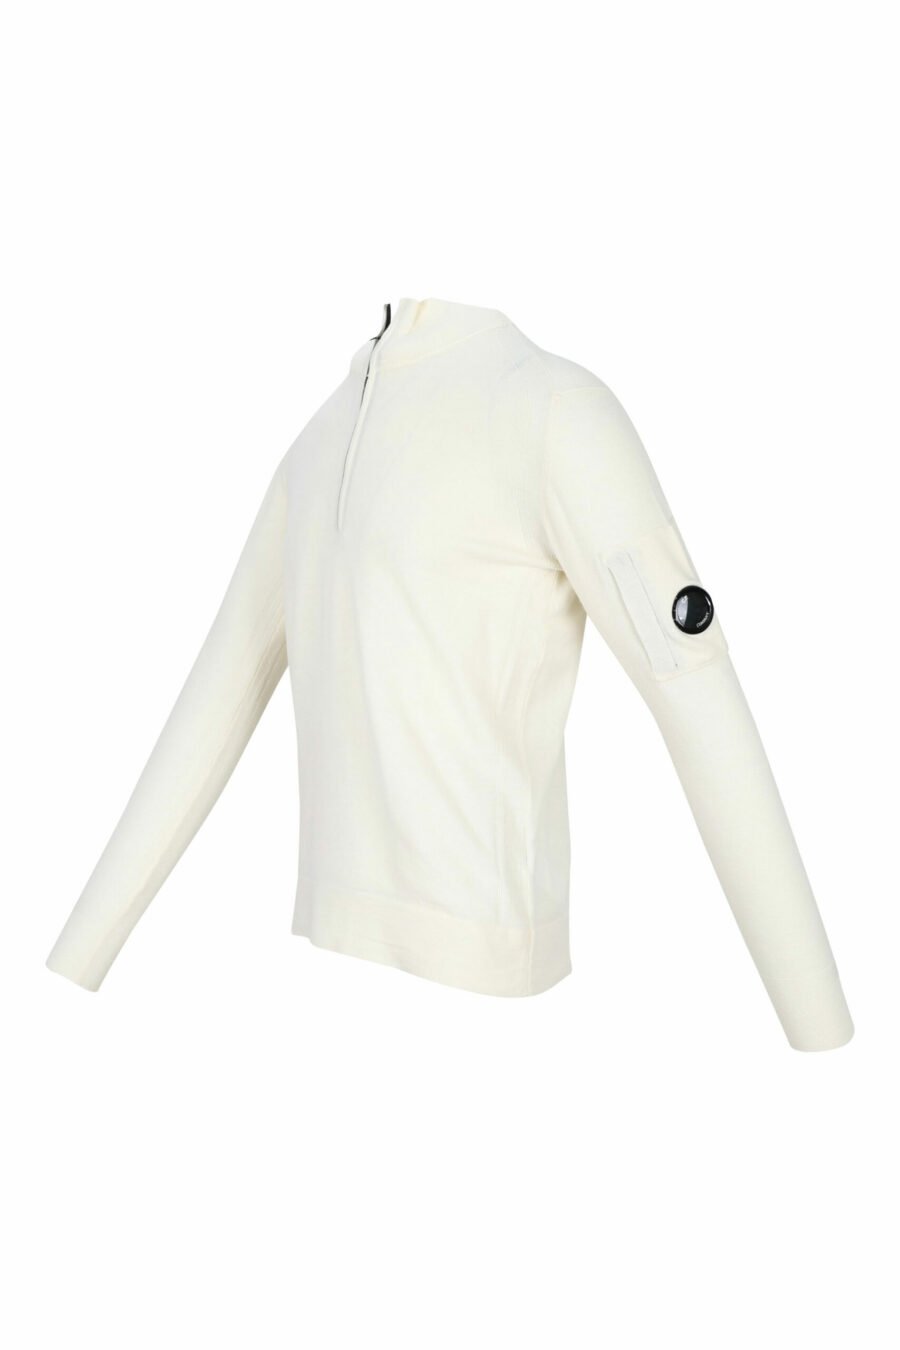 White turtleneck jumper with zip and side lens logo - 7620943601213 1 scaled